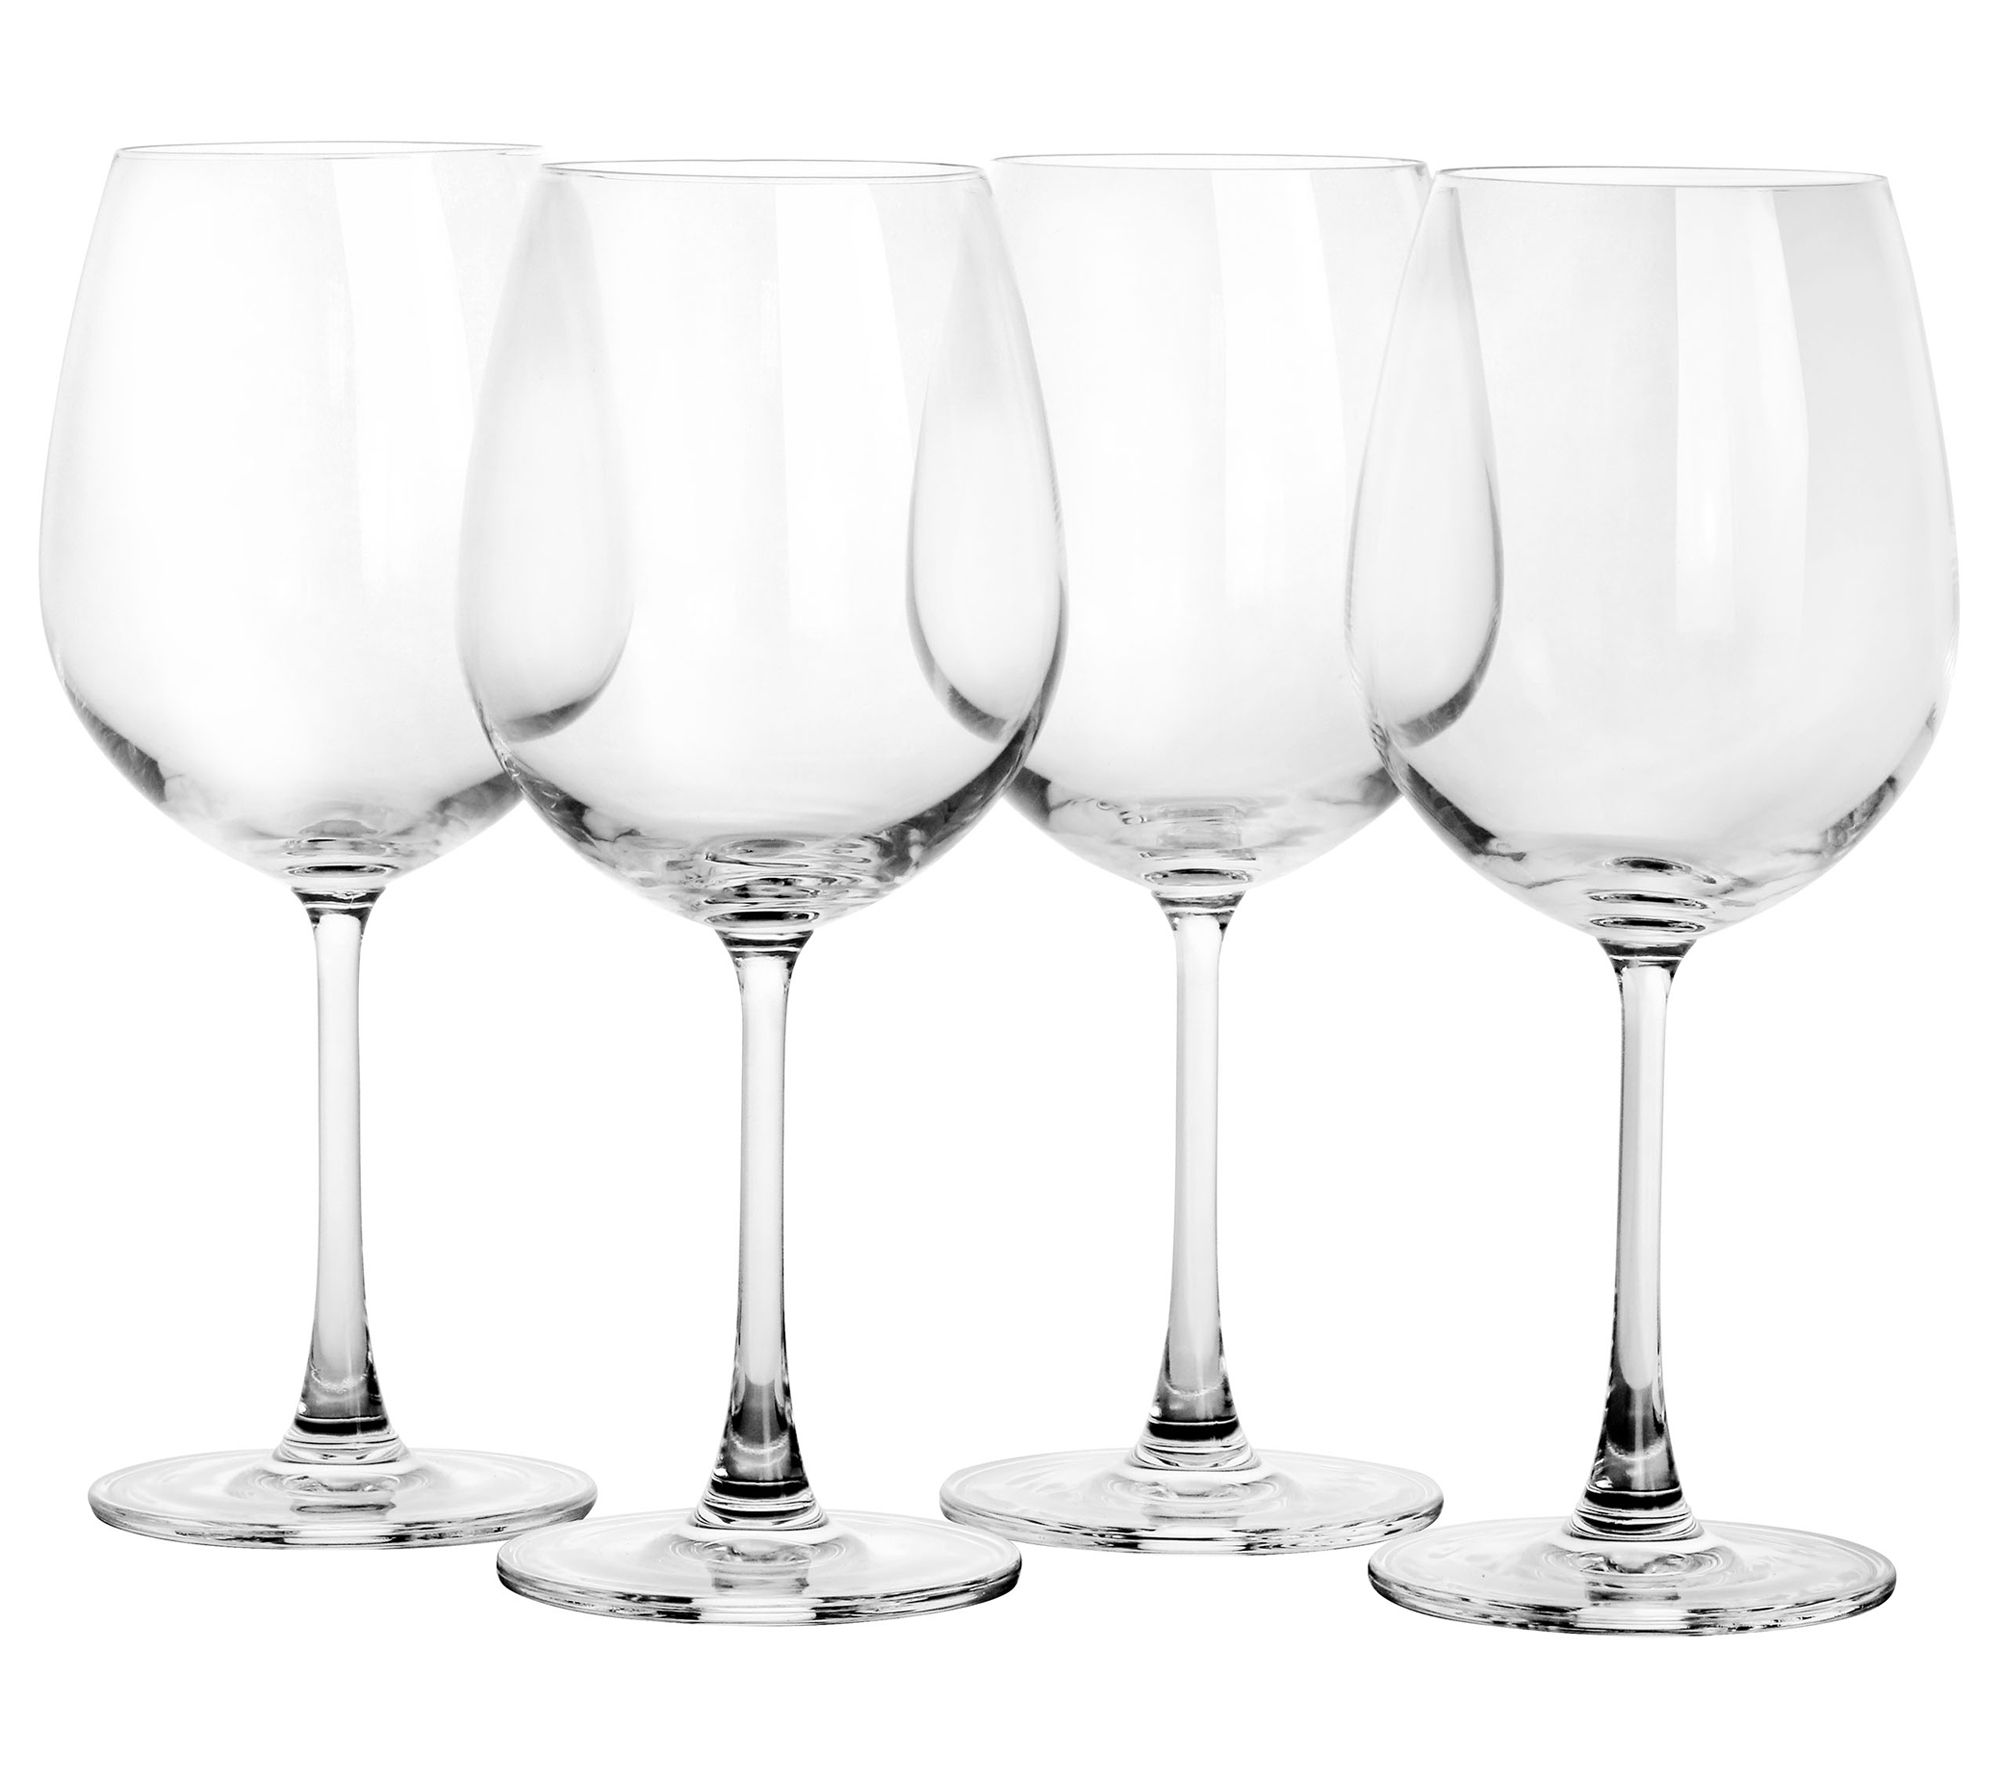 Libbey Signature Greenwich Red Wine Glasses, 24-ounce, Set of 4